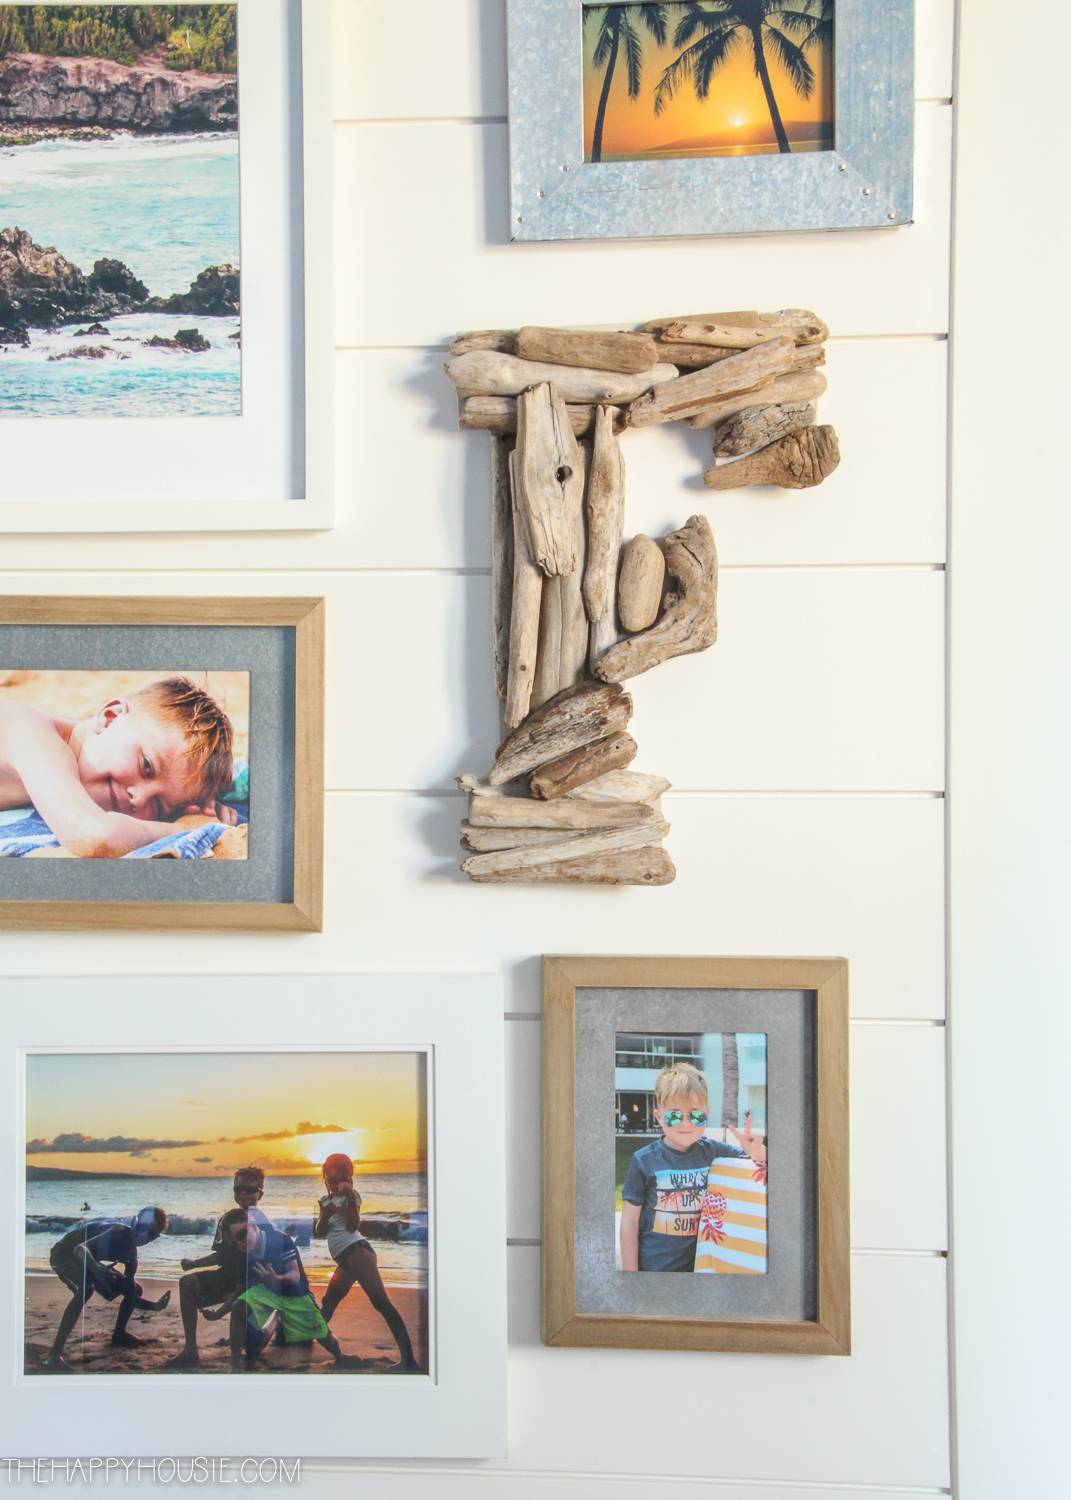 The driftwood letter F in the picture gallery.